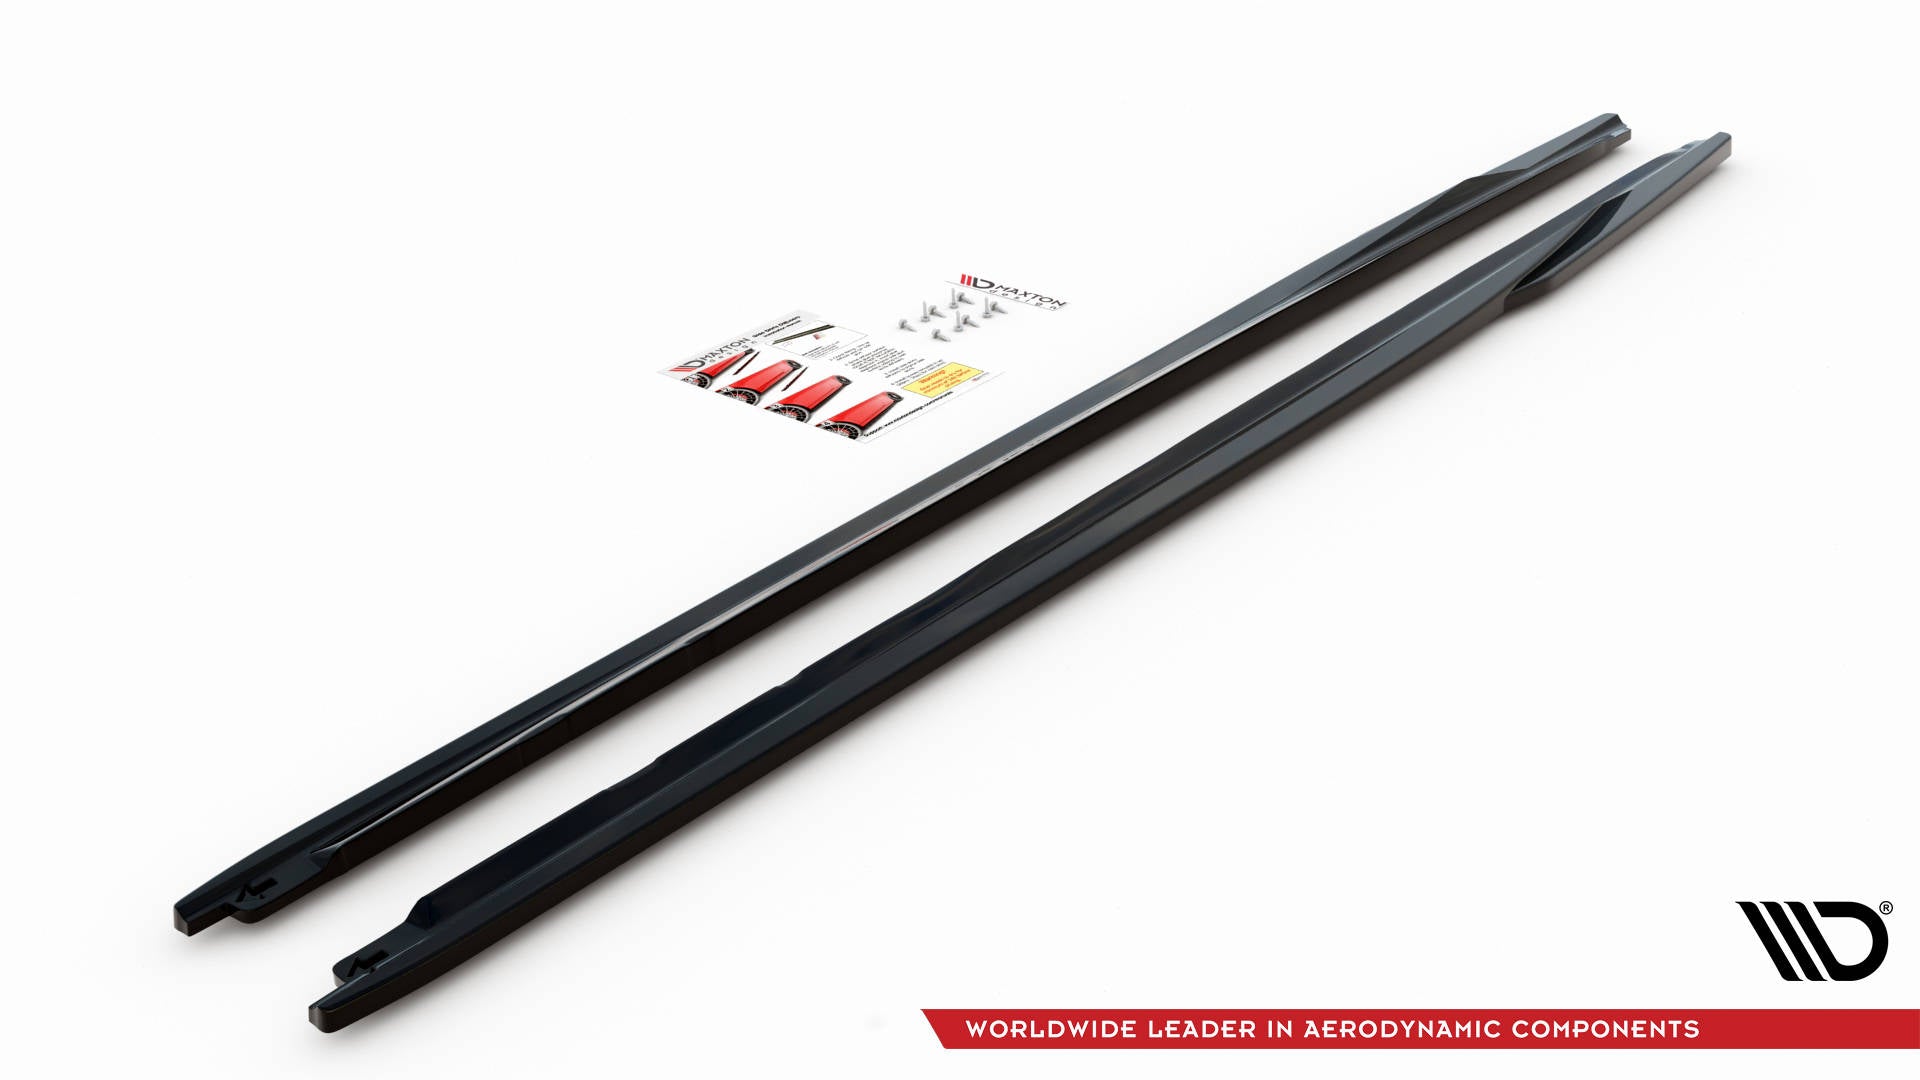 Side Skirts Diffusers Audi A4 B9